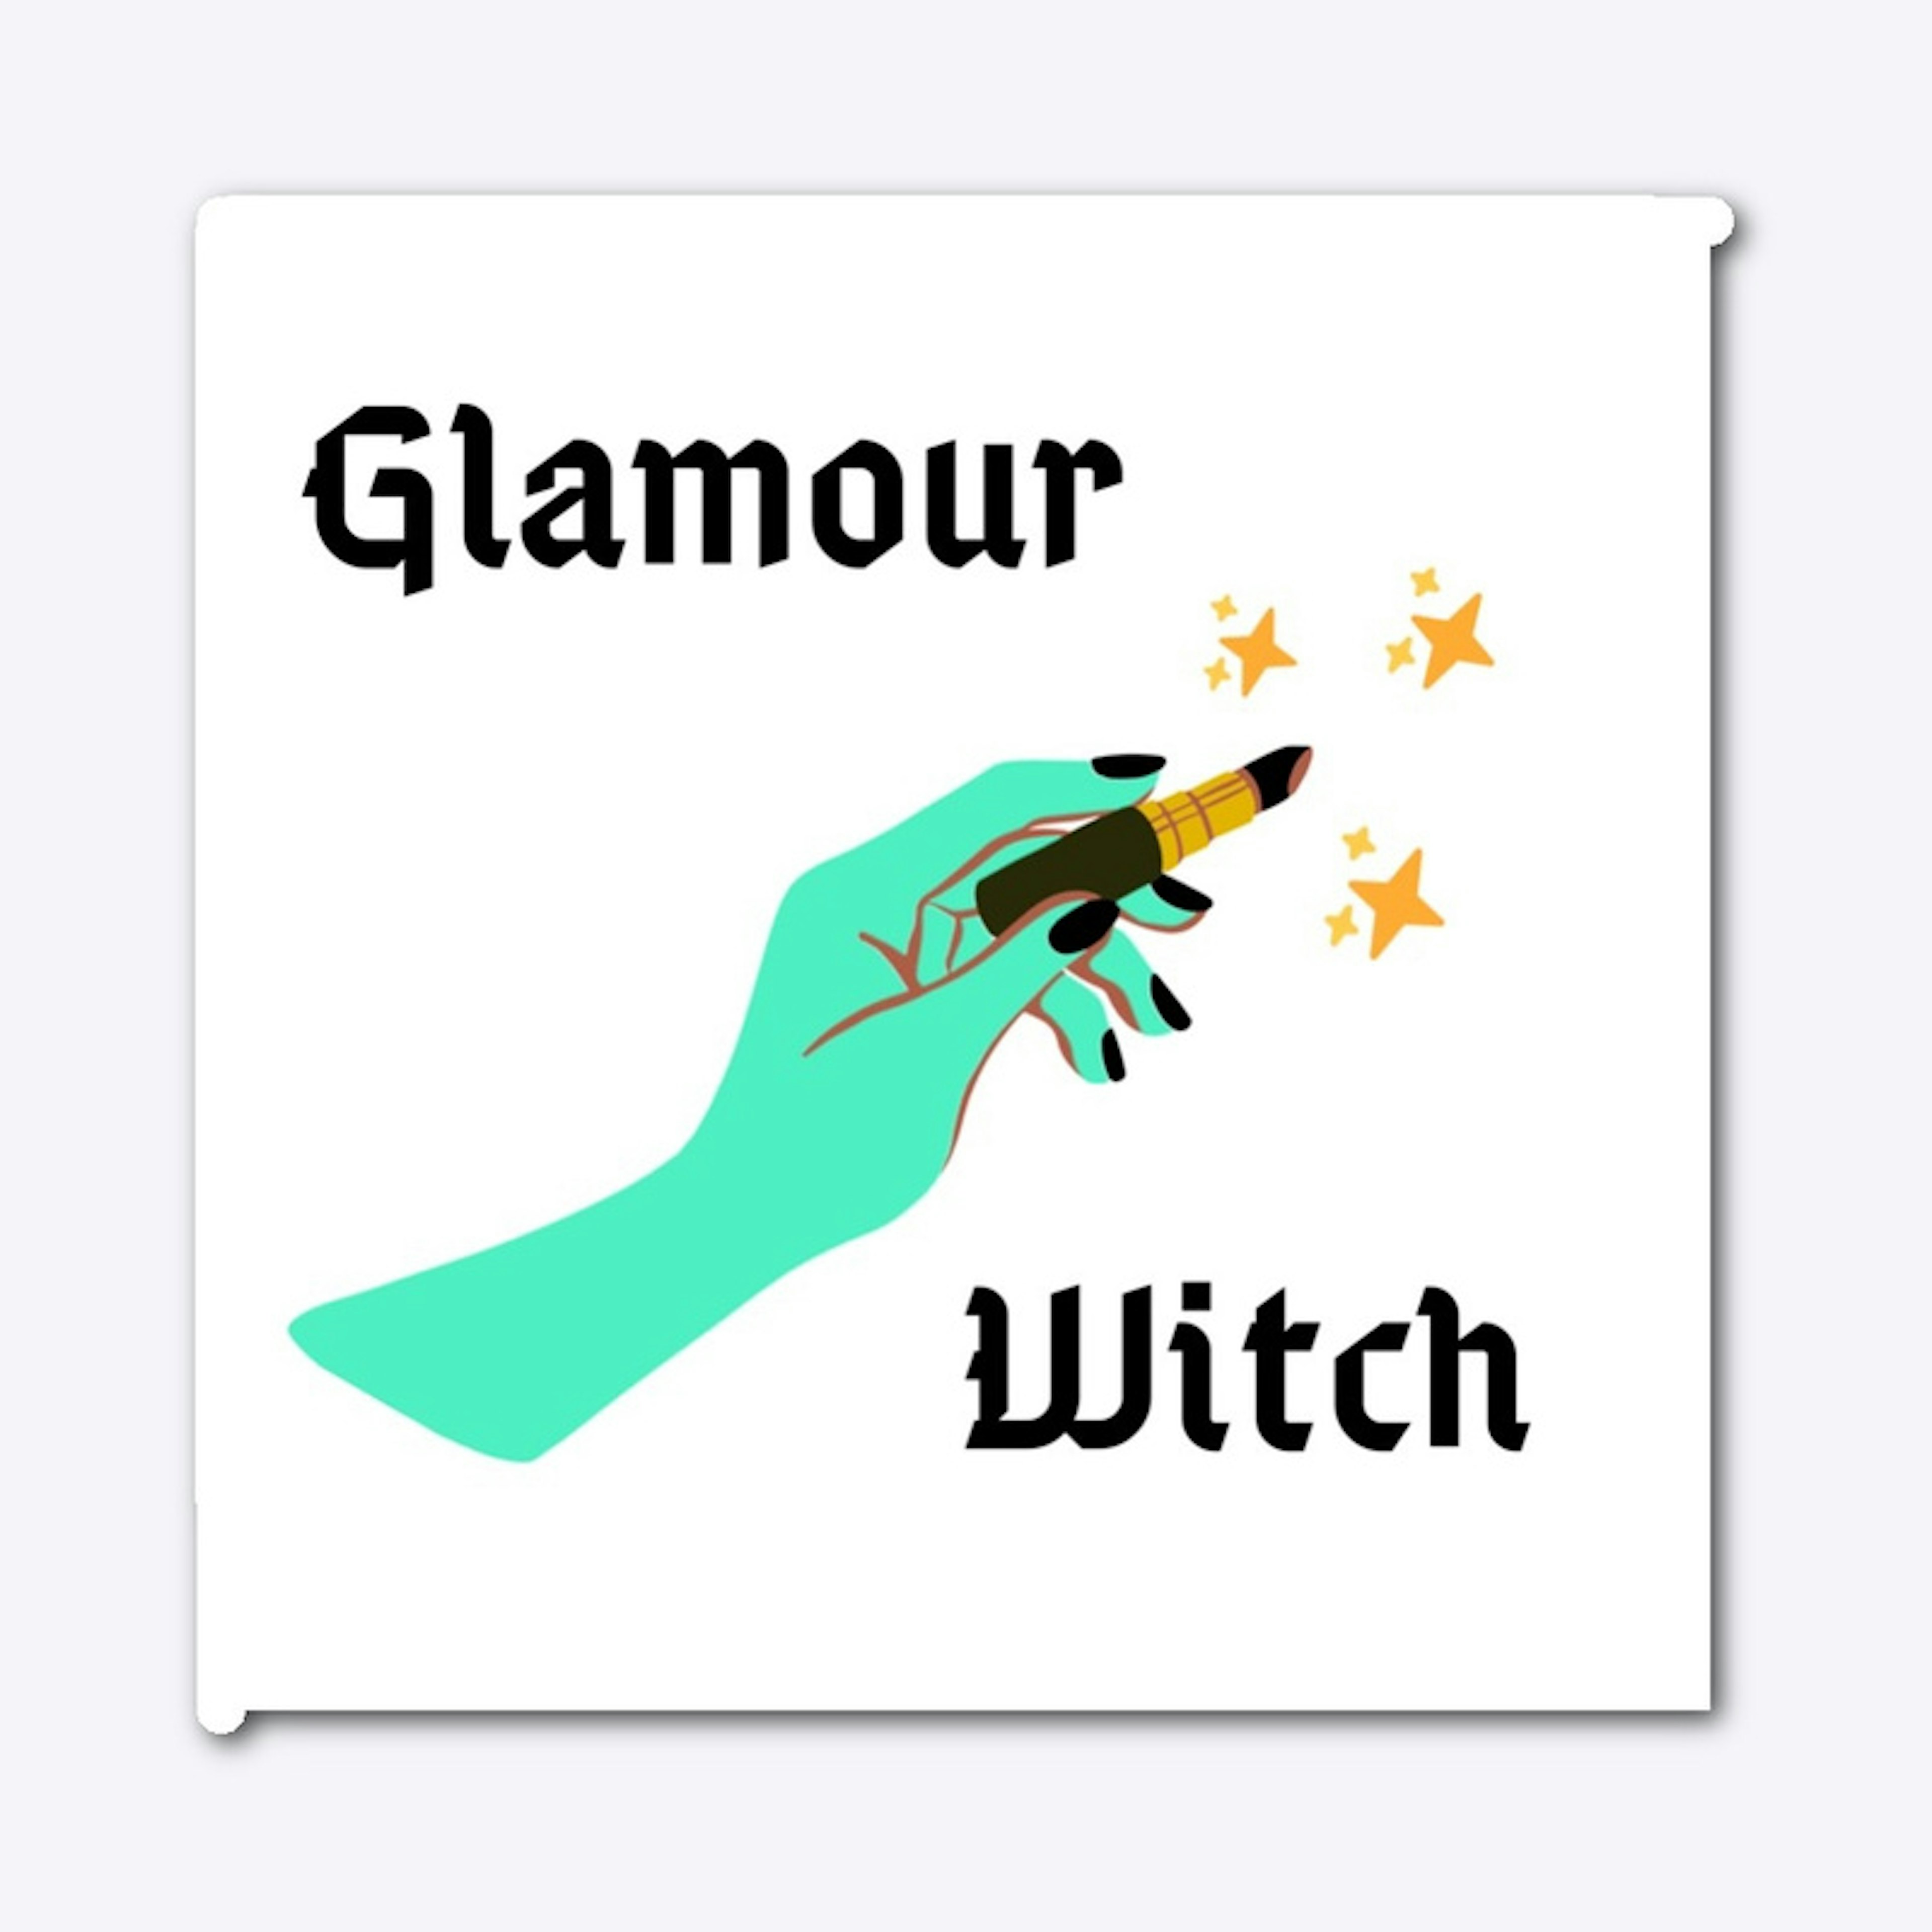 Glamour Witch